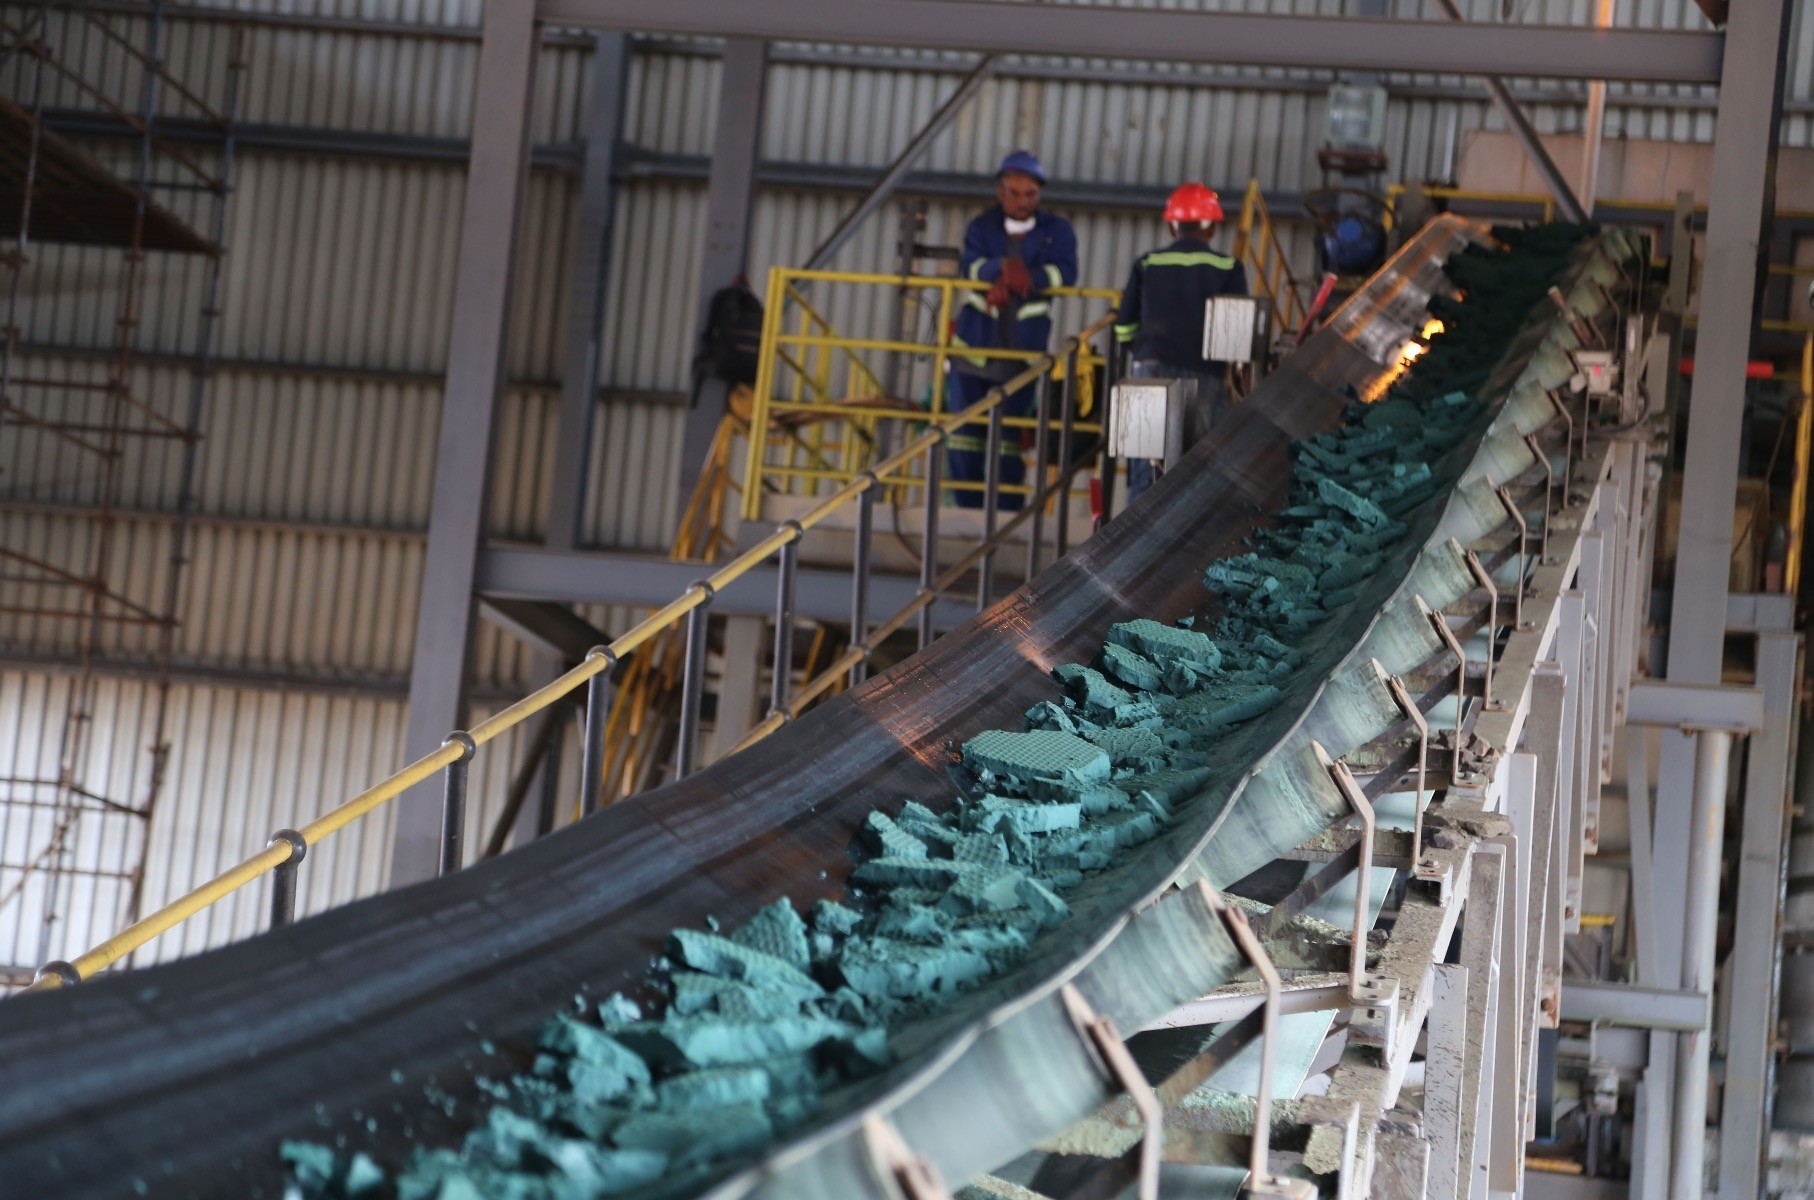 A conveyor belt carries chunks of raw cobalt after a first transformation at a plant in Lubumbashi before being exported to be refined, mainly to China.